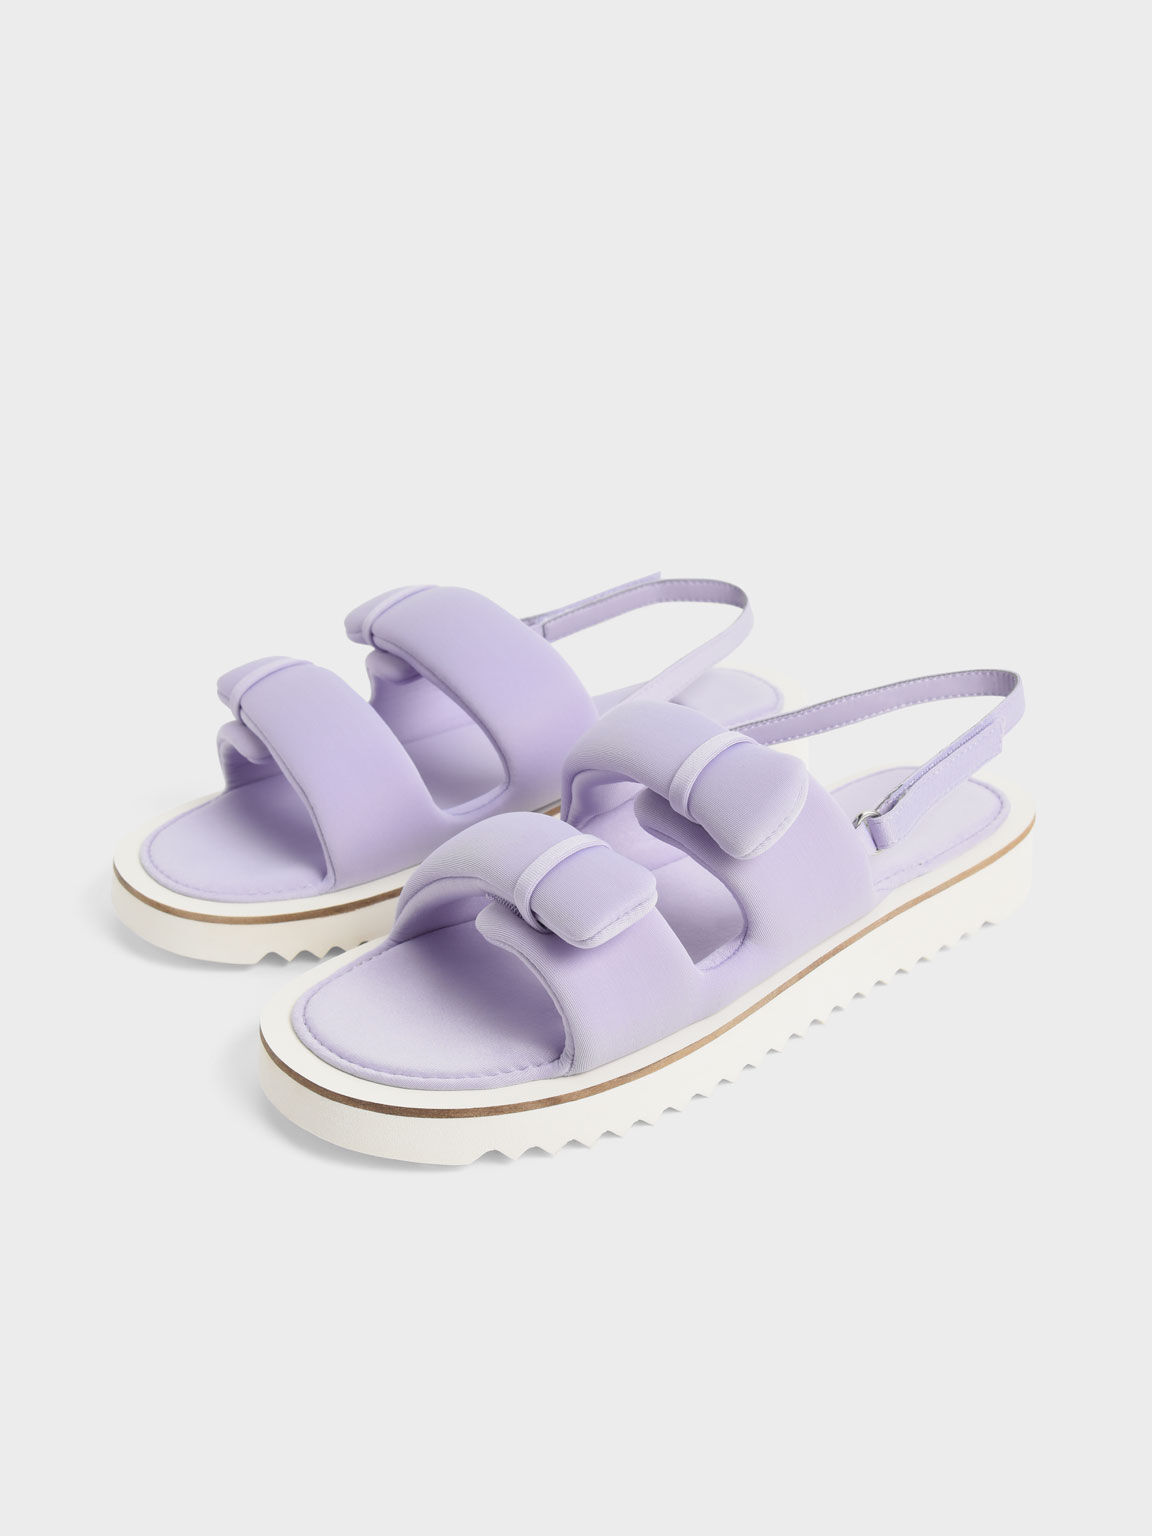 Recycled Polyester Sports Sandals, Lilac, hi-res